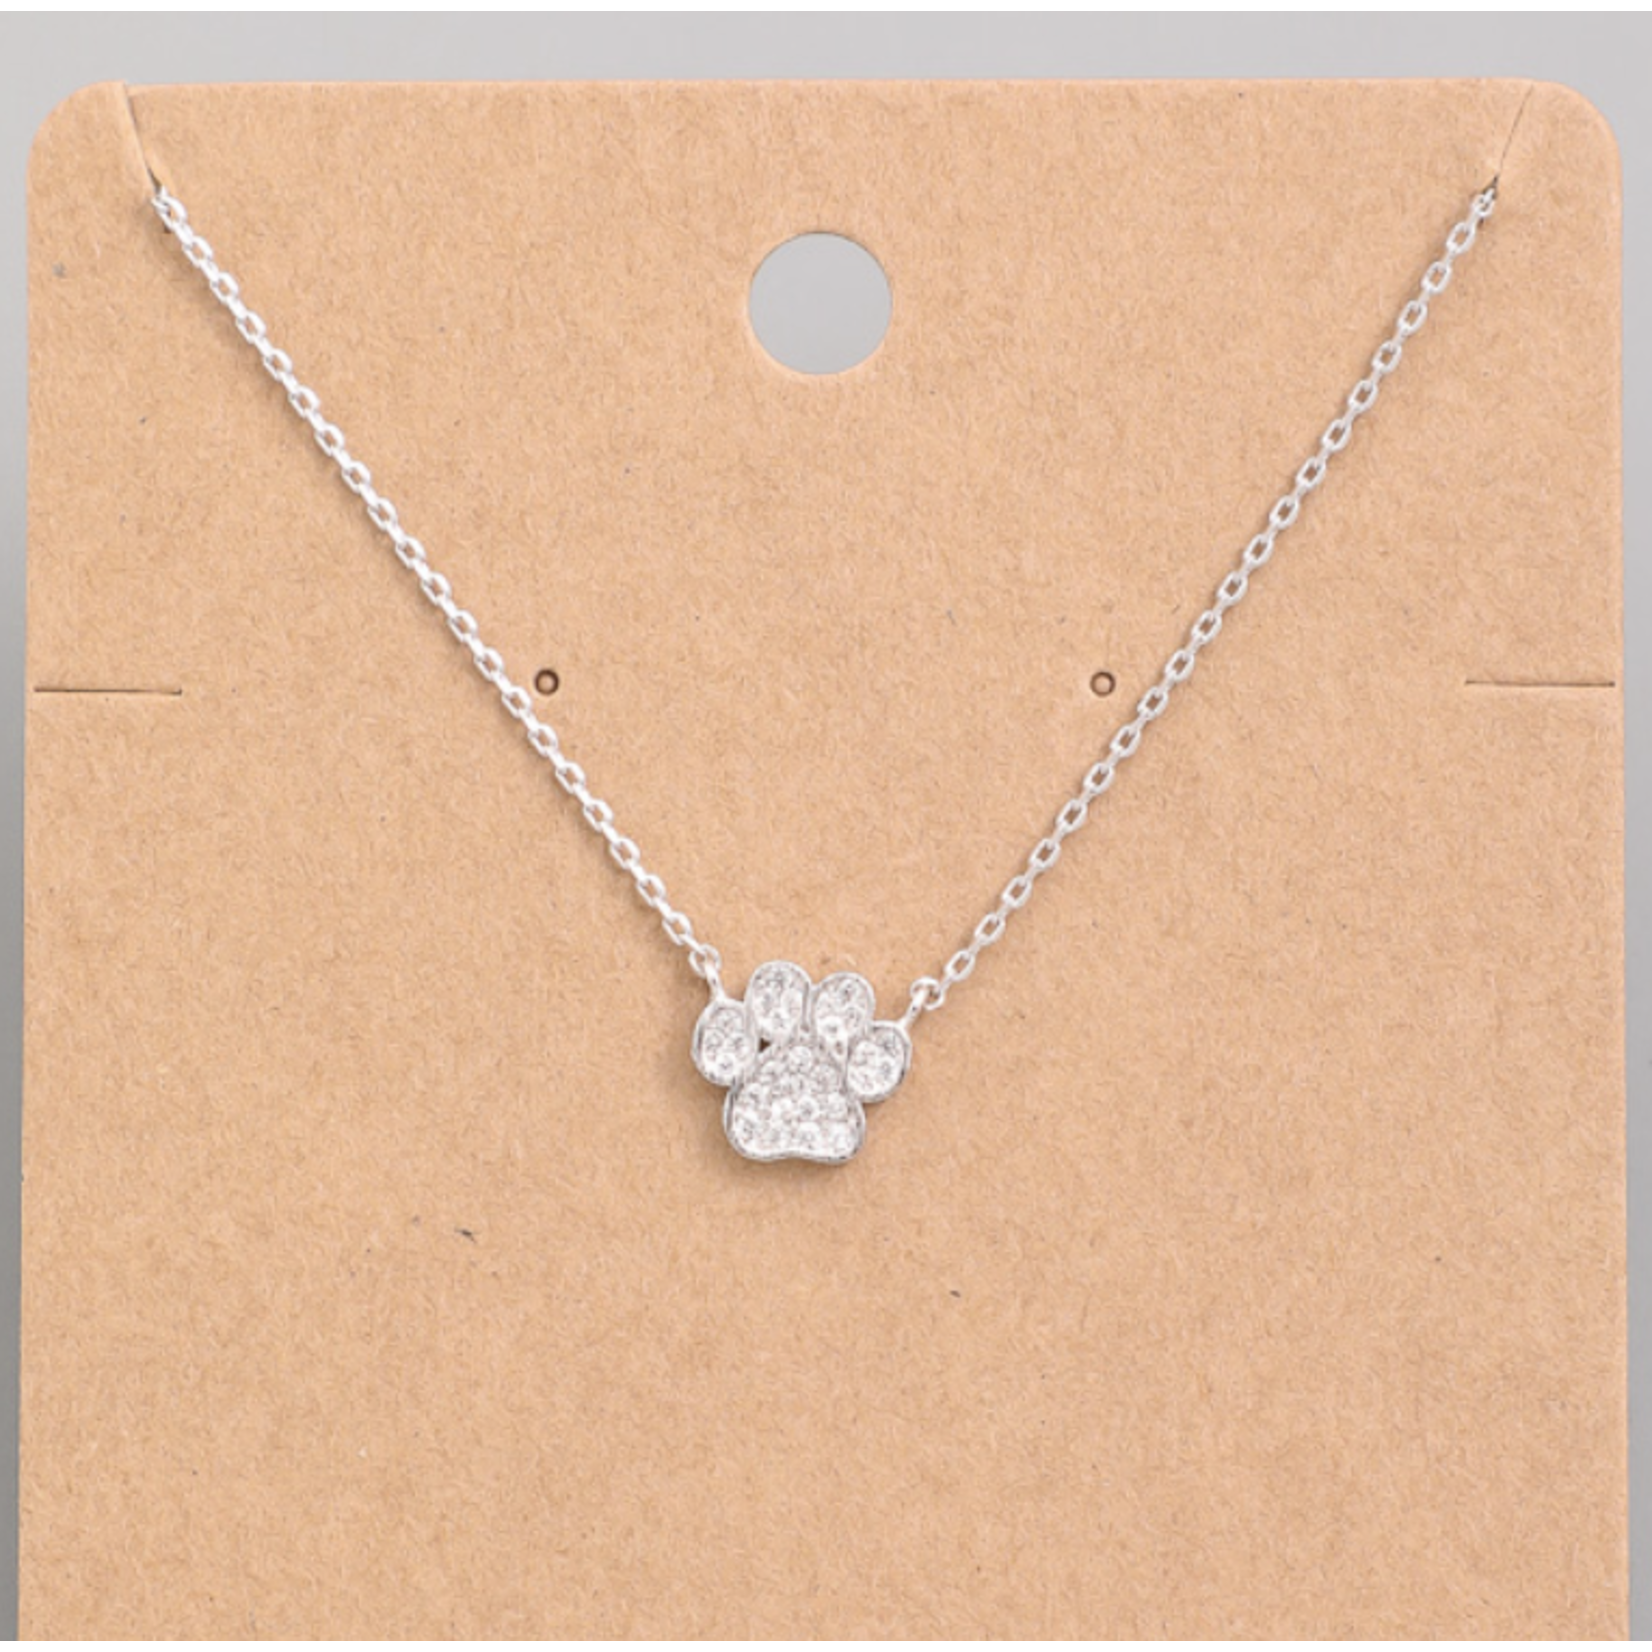 Necklace - Paw Print - Silver